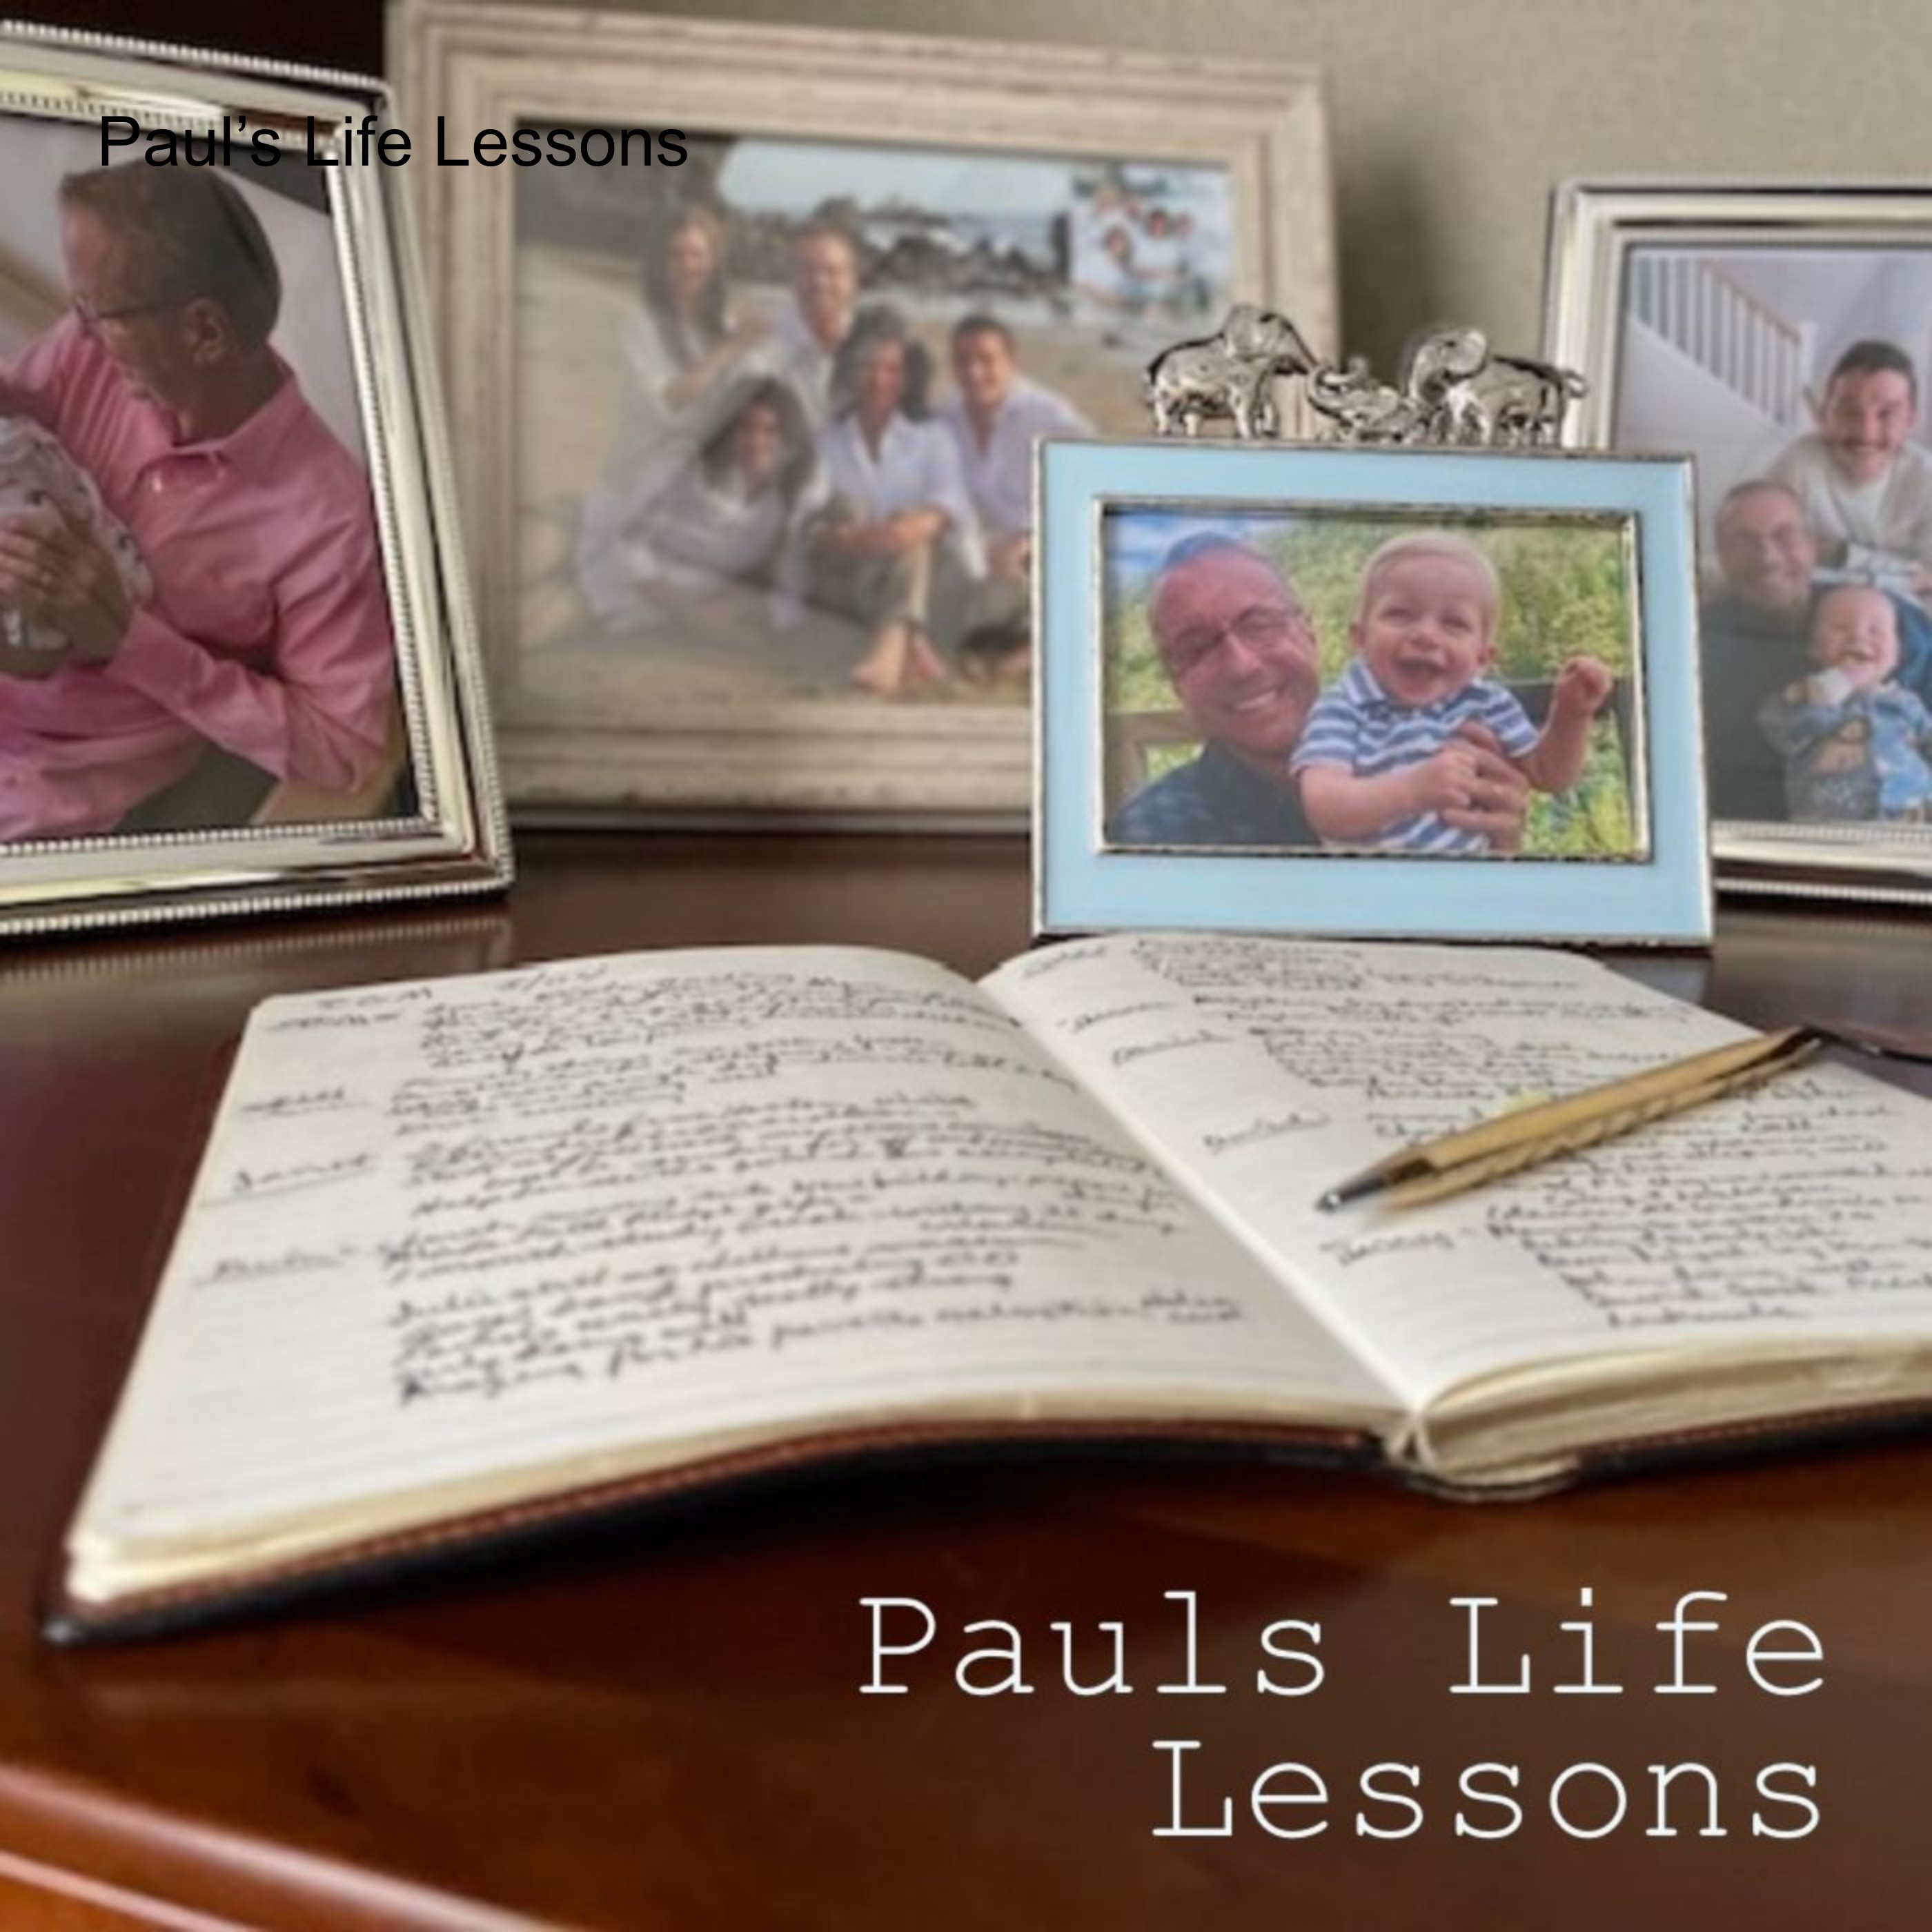 Paul’s Life Lessons